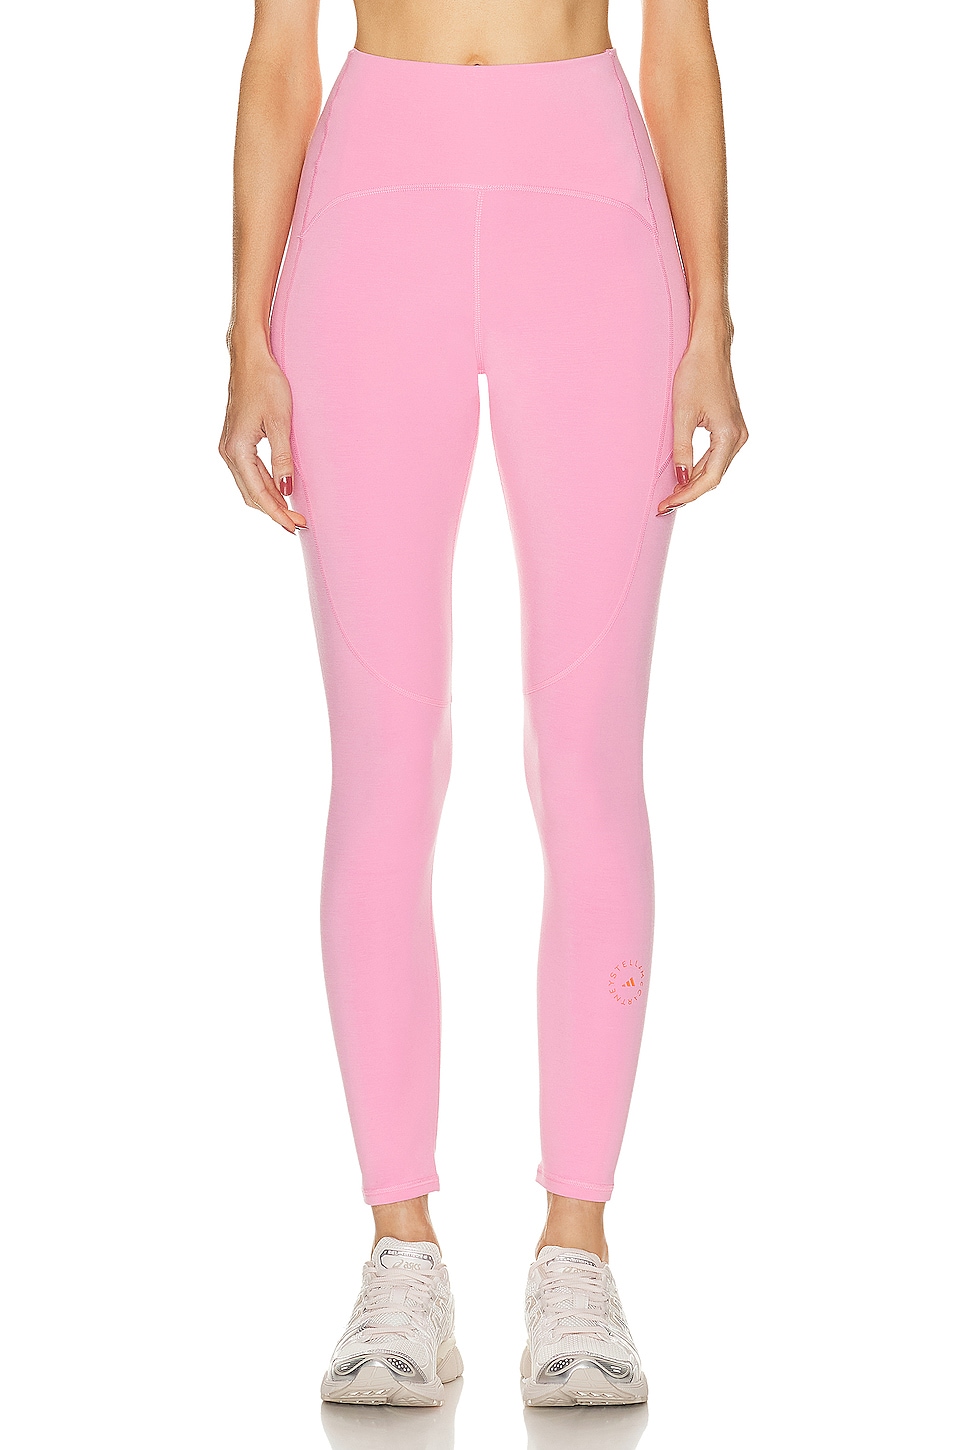 True Strength Yoga 7/8 Tight in Pink